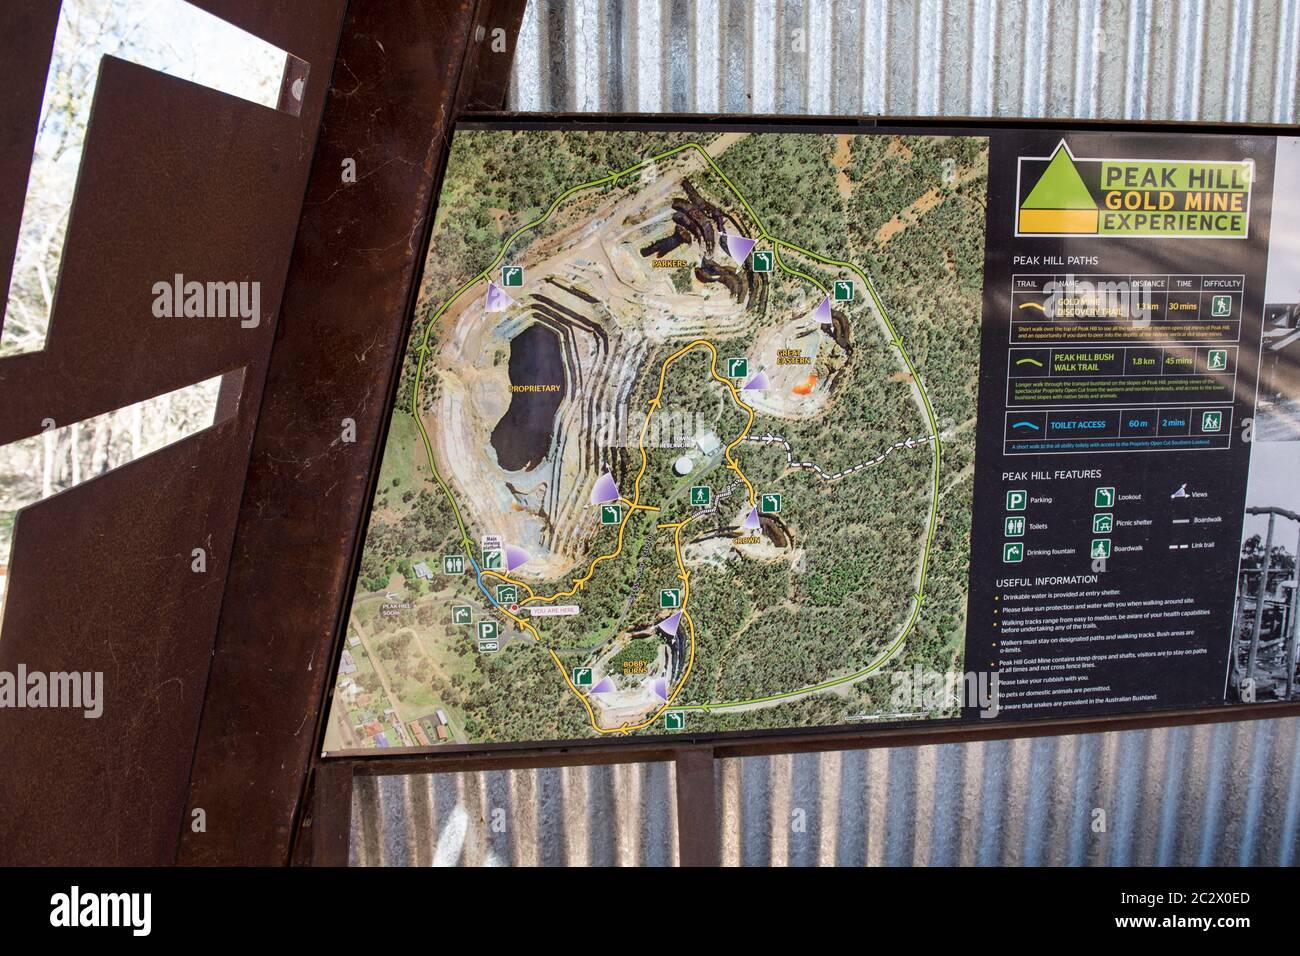 Open cut gold mining complex in Peak Hill, New South Wales, Australia. Pictured is a map showing the walking tracks around the mining complex. Stock Photo